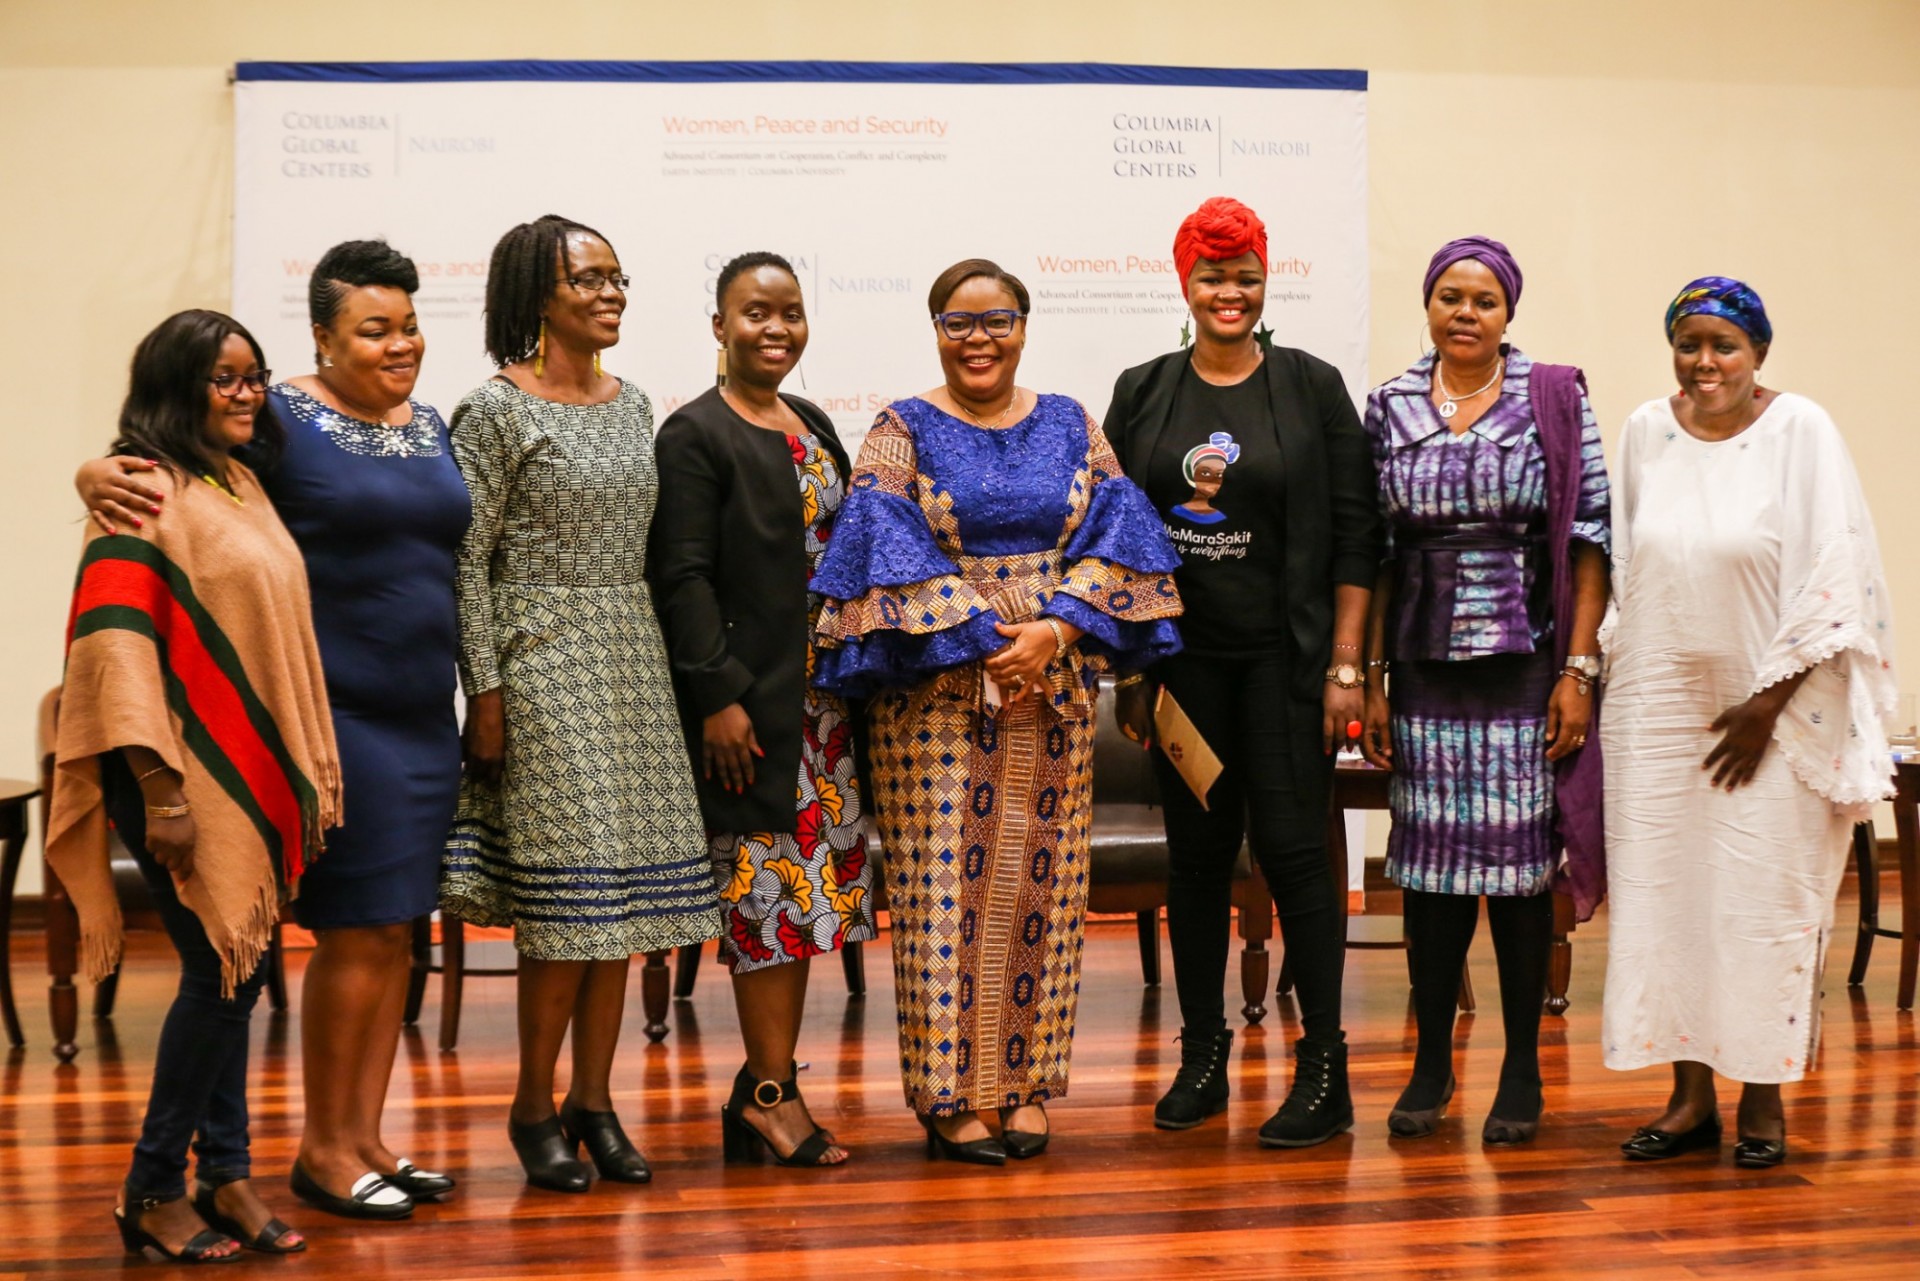 Leymah Gbowee, ED of the WPS Program, with Fellowship participants at the Columbia Global Center in Nairobi. 